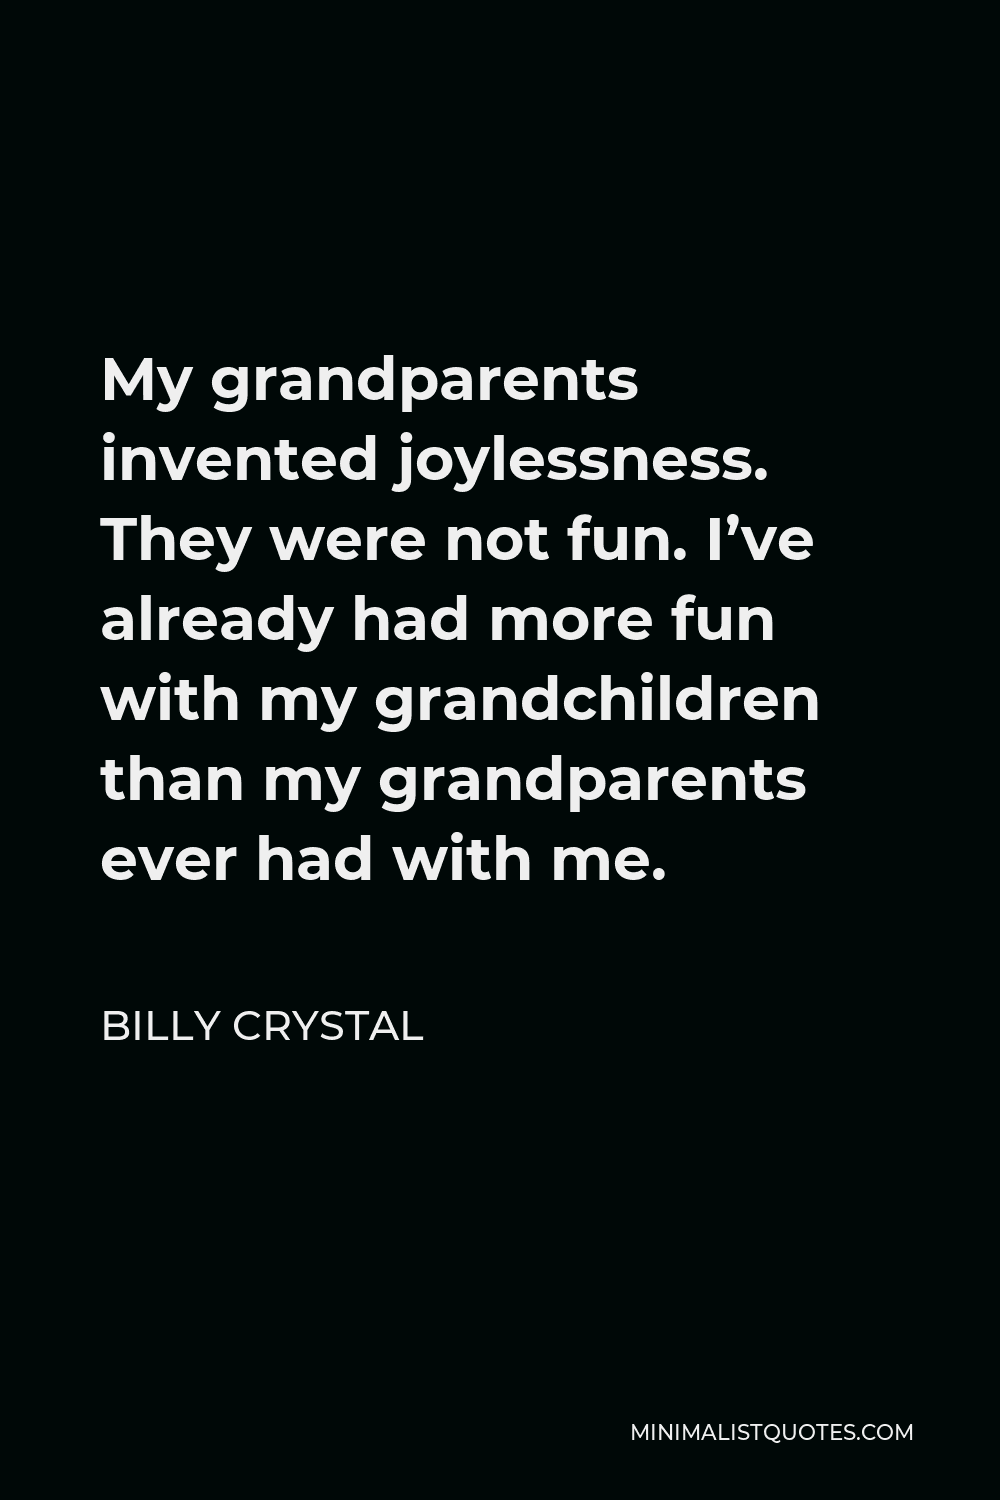 Billy Crystal Quote - My grandparents invented joylessness. They were not fun. I’ve already had more fun with my grandchildren than my grandparents ever had with me.